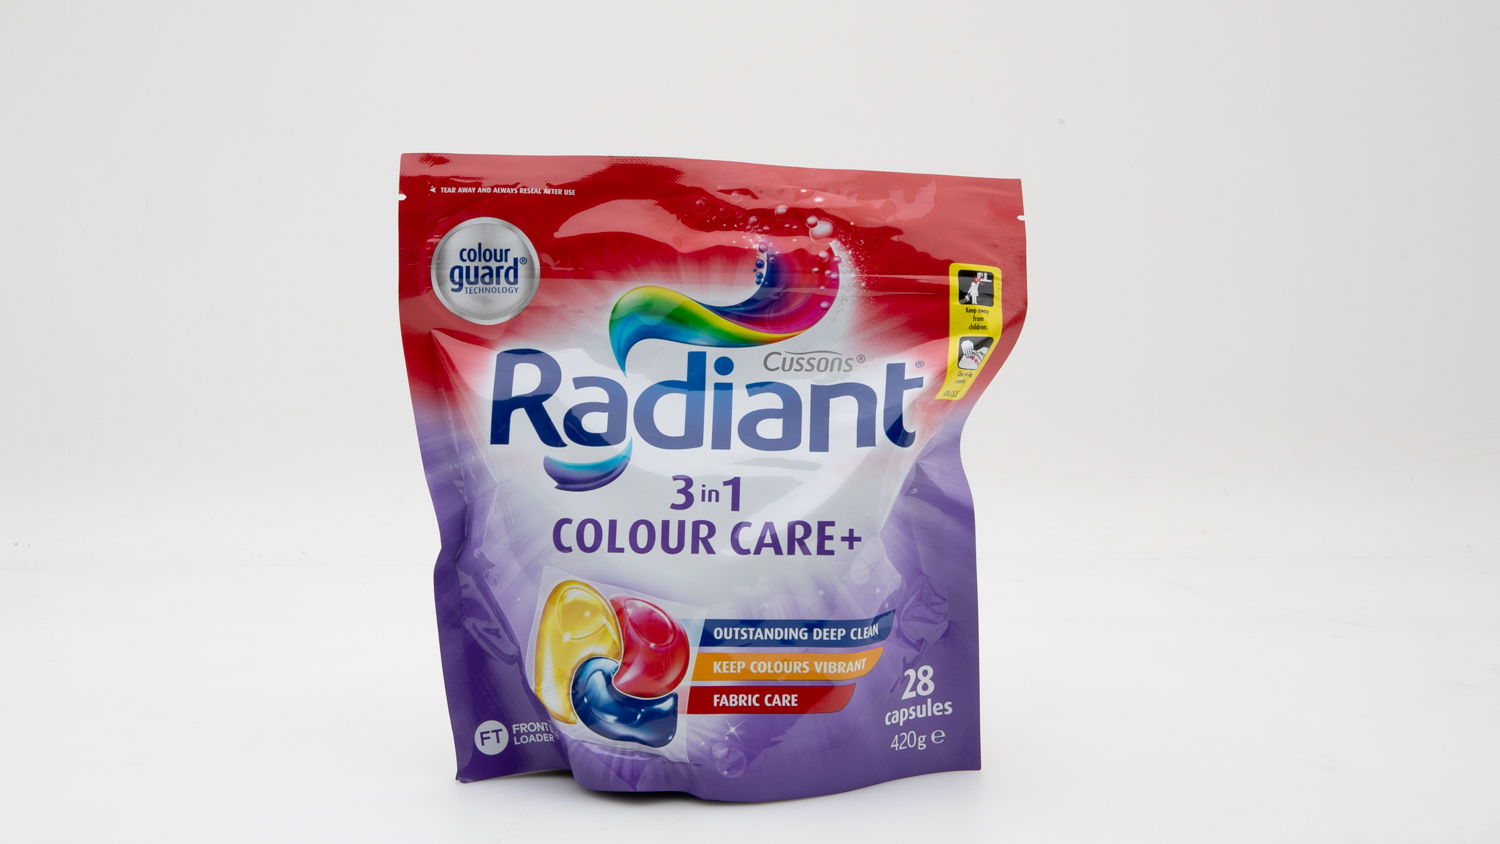 Radiant 3 in 1 Colour Care+ 28 Capsules 420g Front Loader carousel image